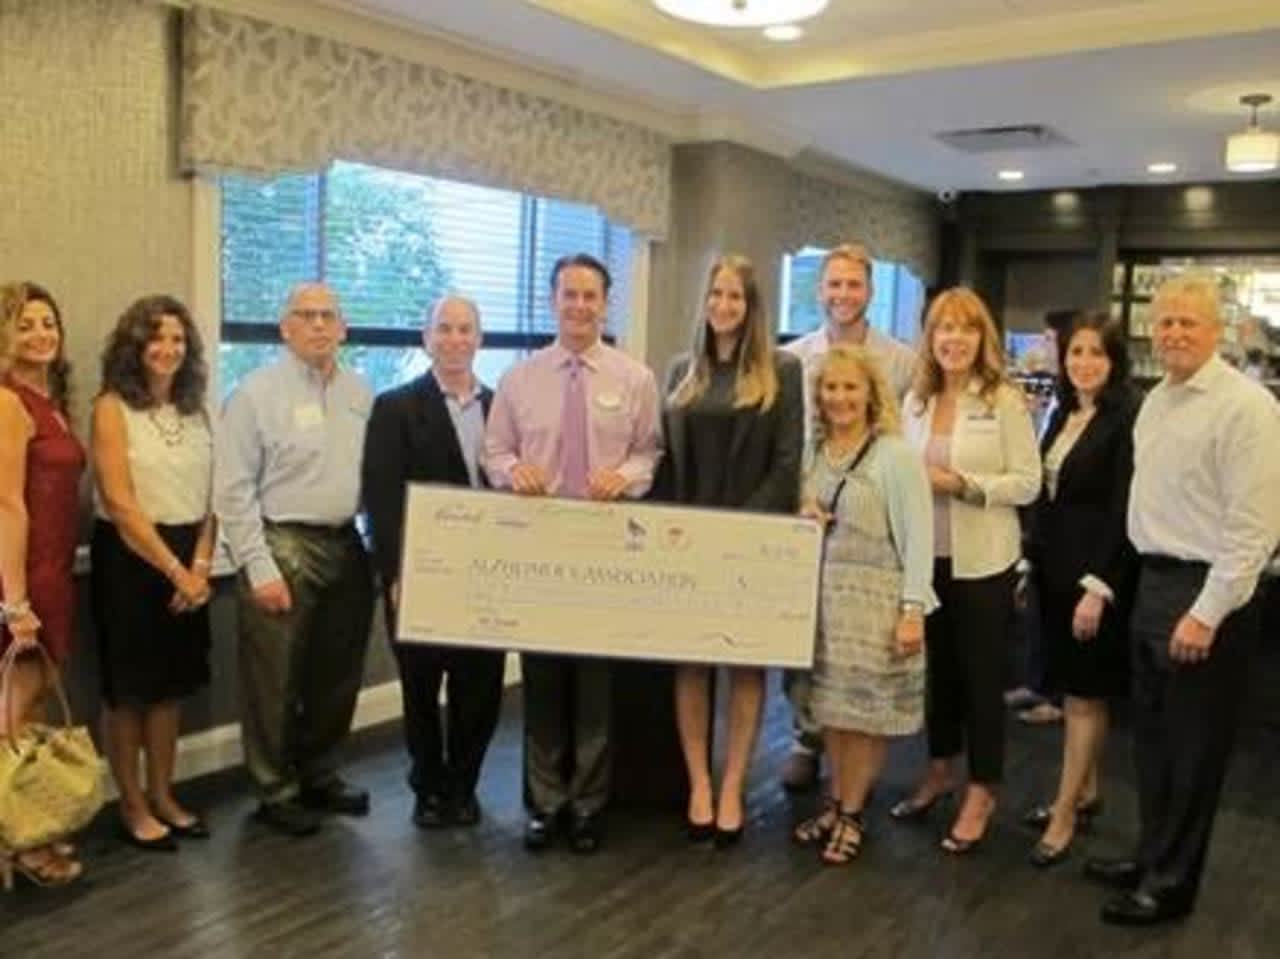 The Armonk, Mount Kisco, Somers, Greenwich and Chappaqua-Millwood Chambers of Commerce present a check for $2.985 to help fight Alzheimer's disease at the Bristal in Armonk